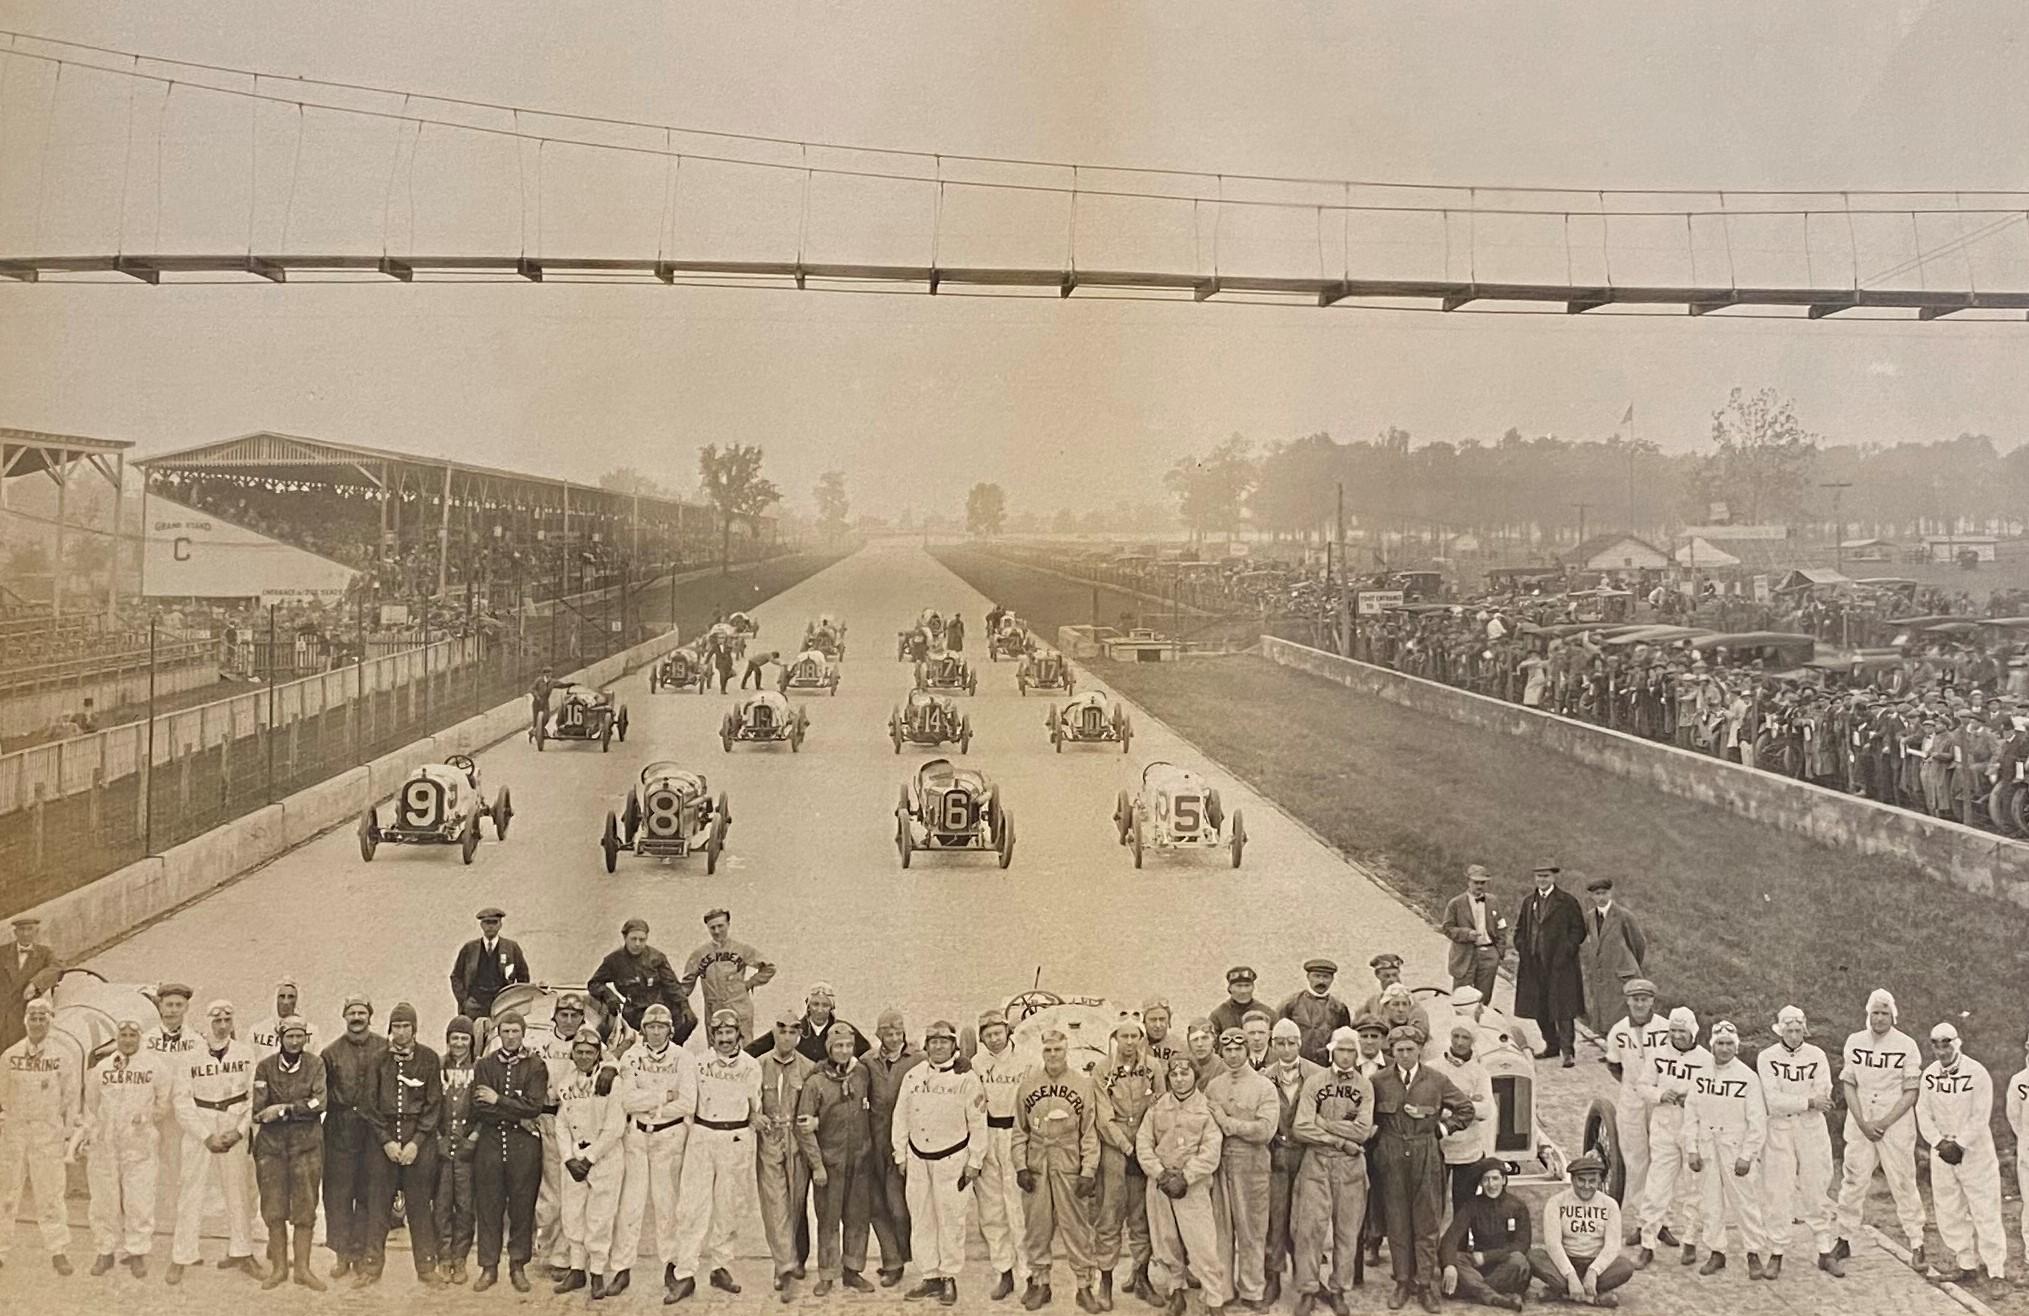 Other Indianapolis 500 Panoramic Sepia Photograph of Drivers, Cars, & Mechanics, 1915